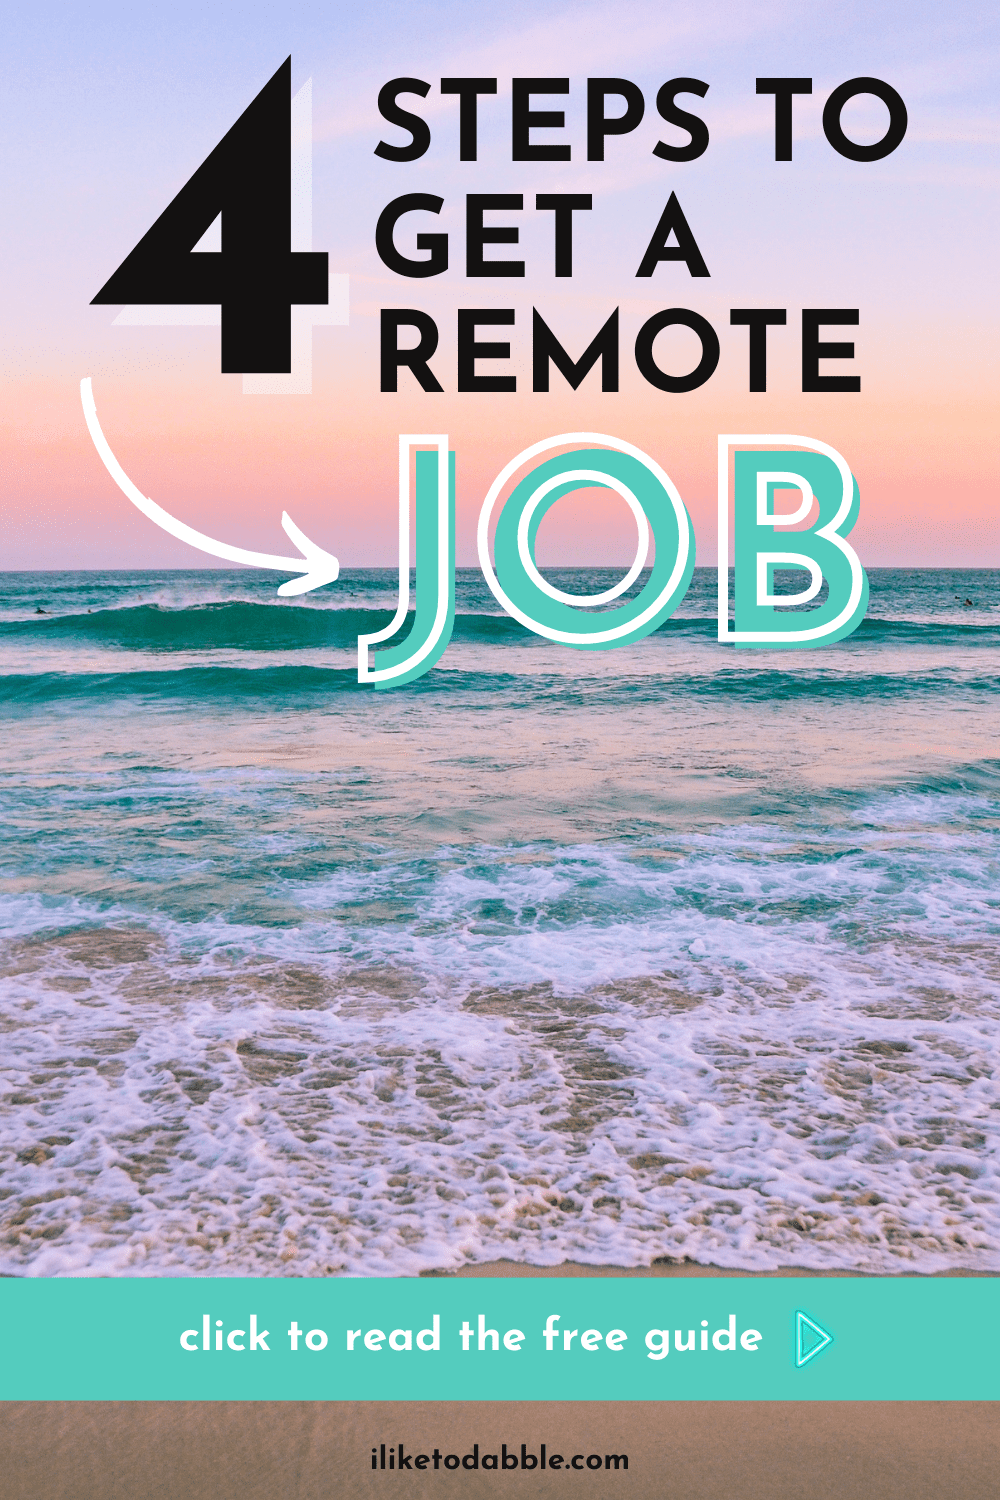 how to get a remote job pinnable image with a beach and title text